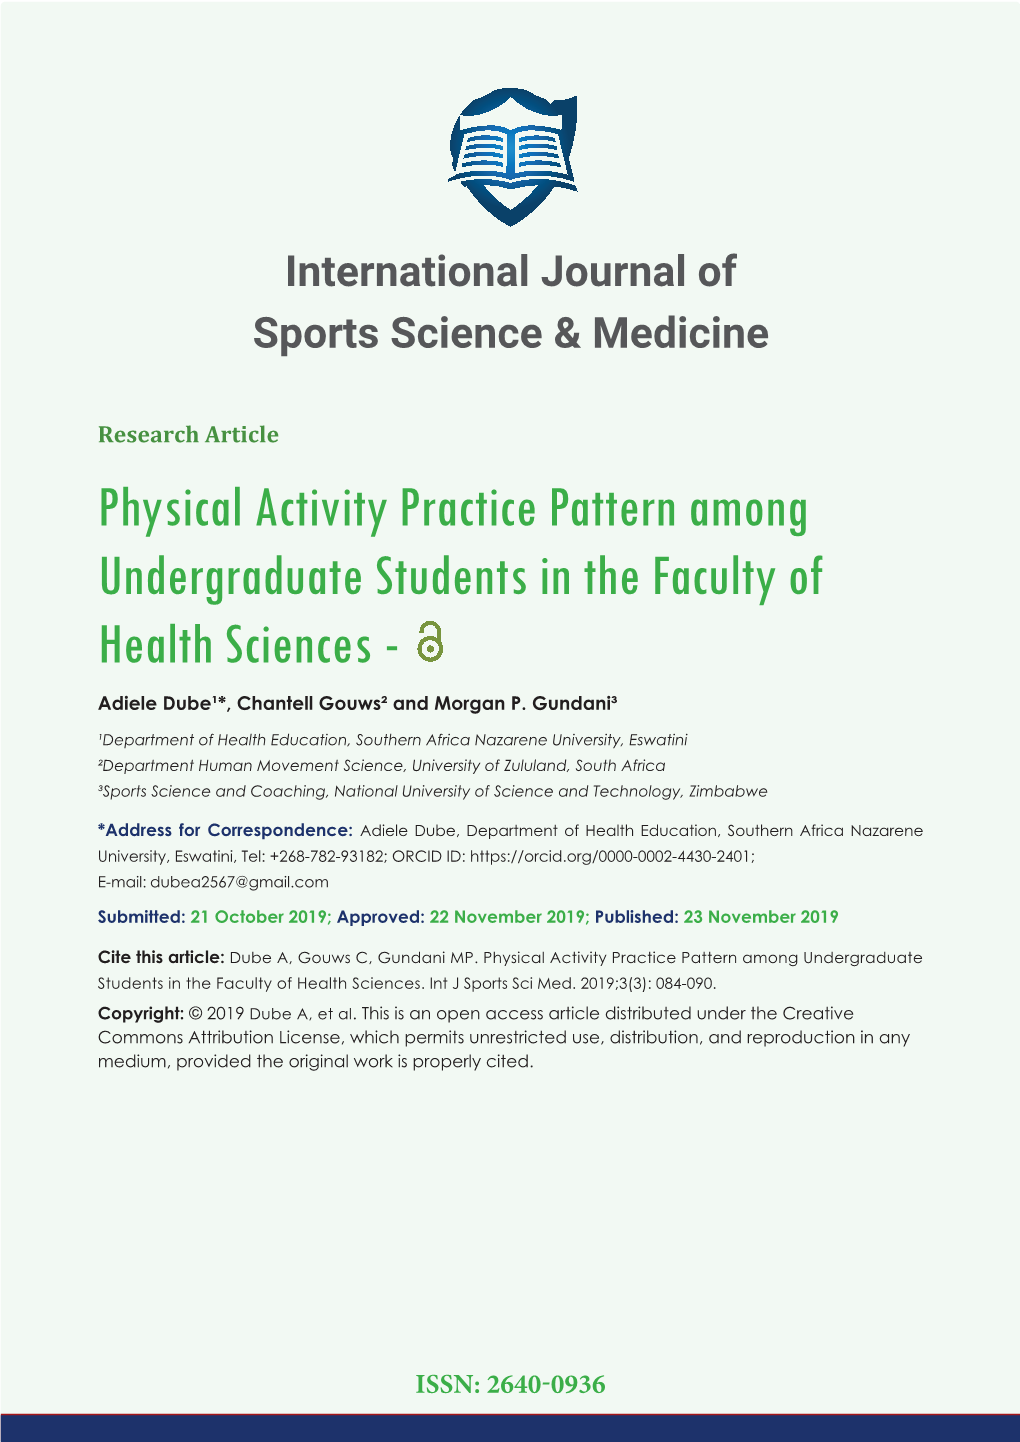 Physical Activity Practice Pattern Among Undergraduate Students in the Faculty of Health Sciences - Adiele Dube¹*, Chantell Gouws² and Morgan P